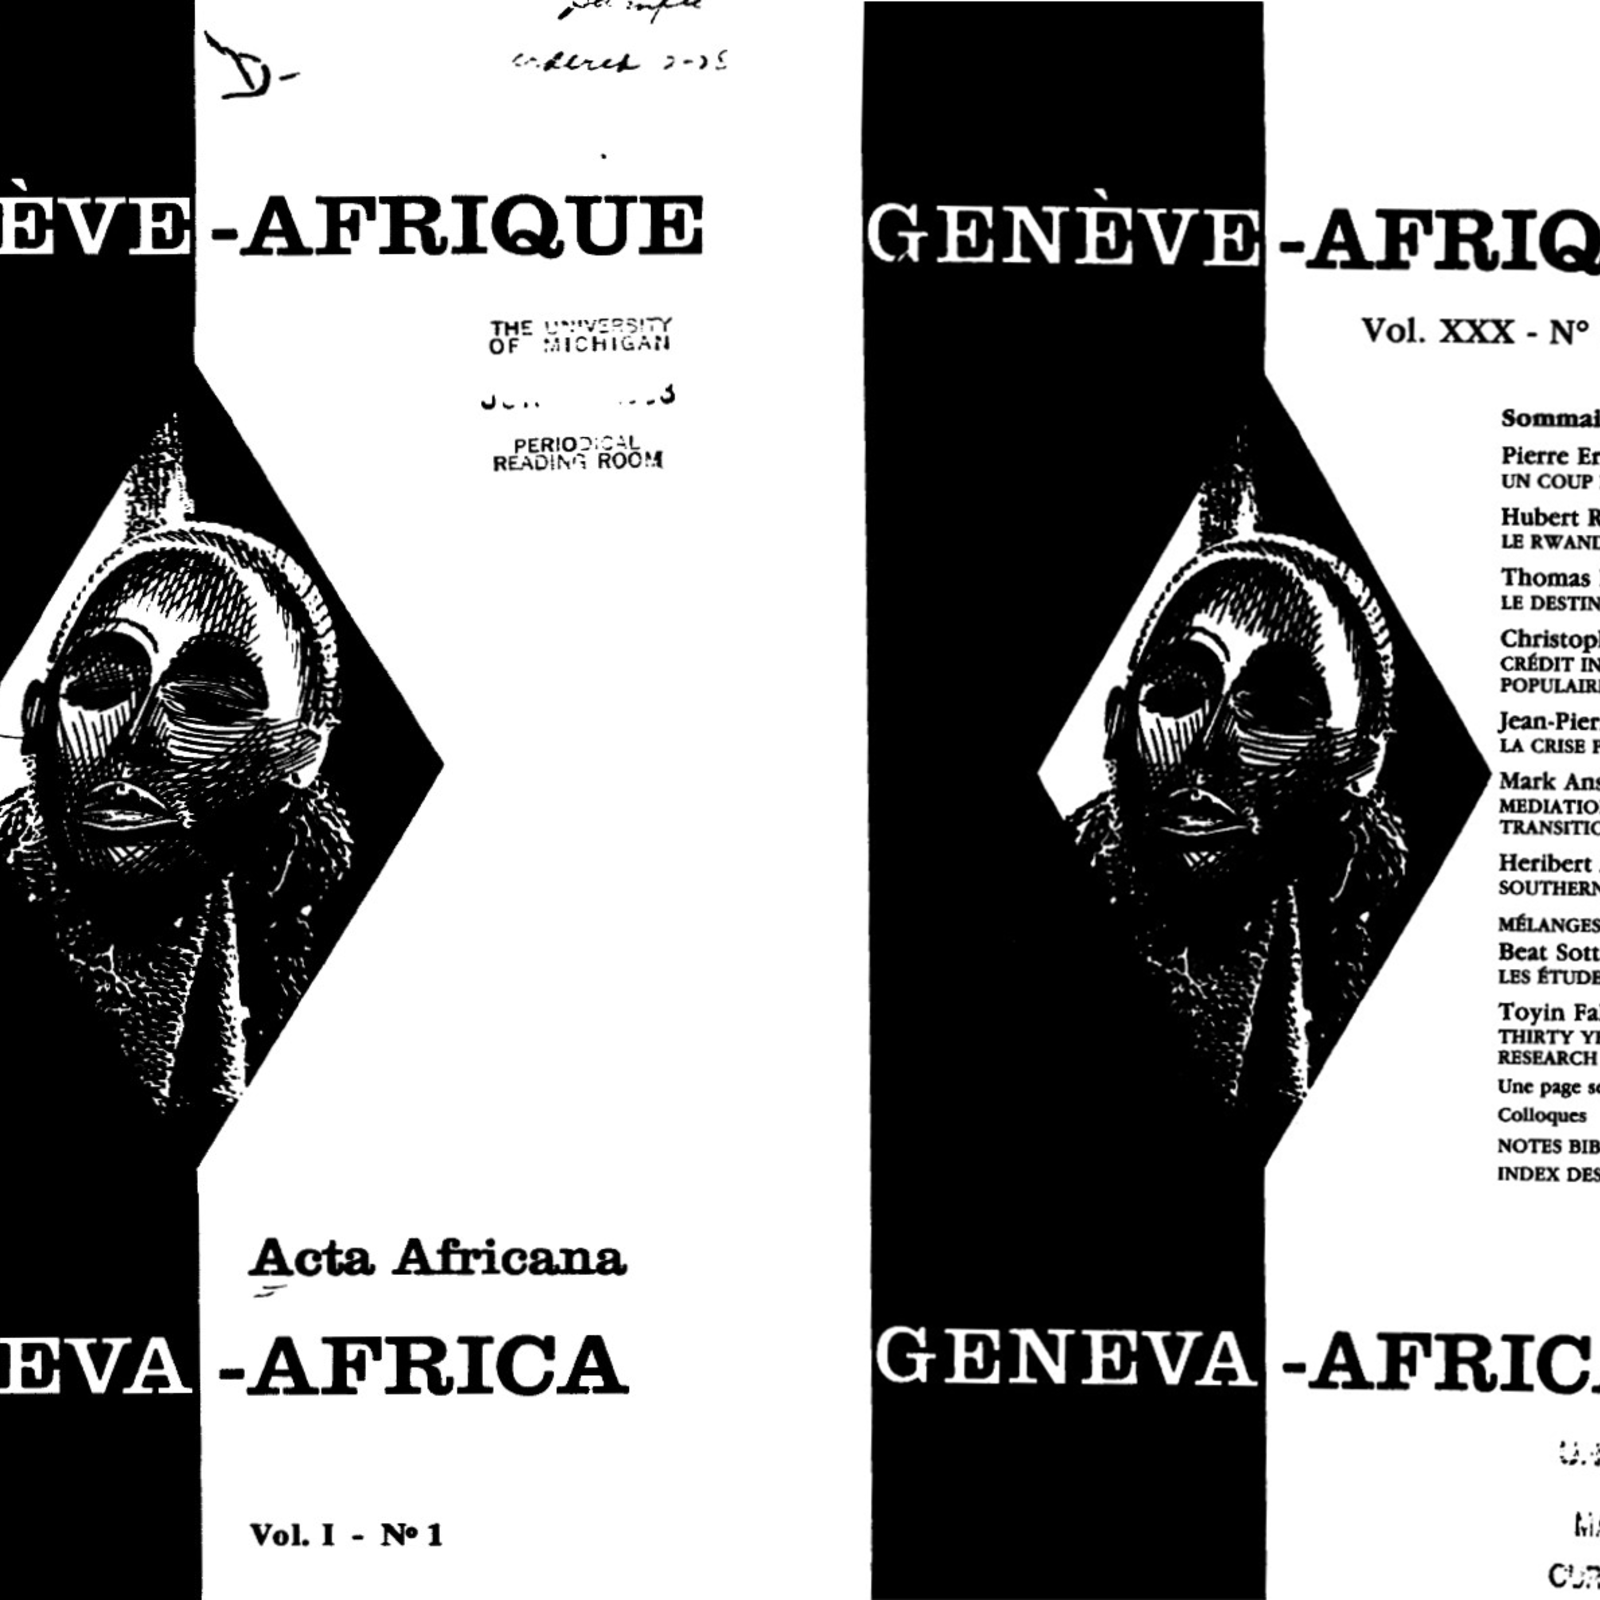 Covers of first and last issue of the journal Geneva-Africa